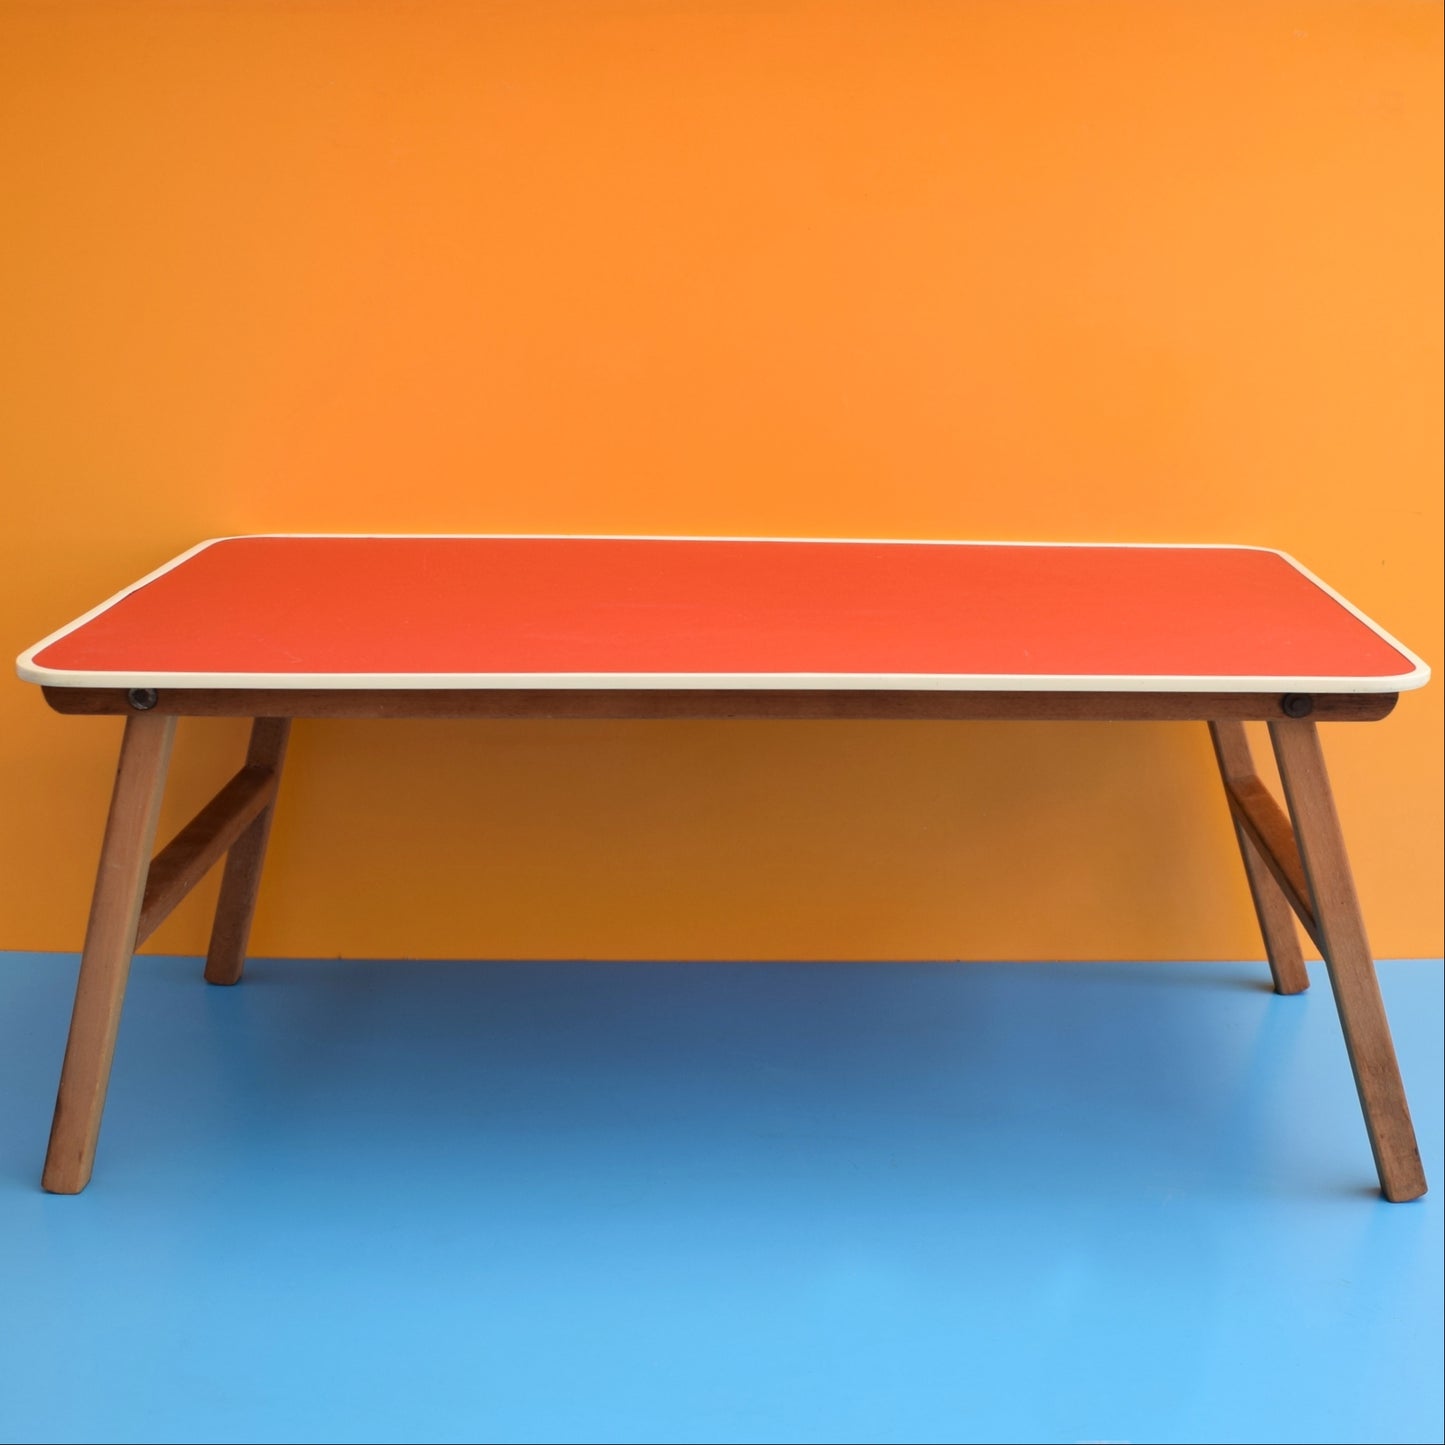 Vintage 1960s Folding Low Table - Red